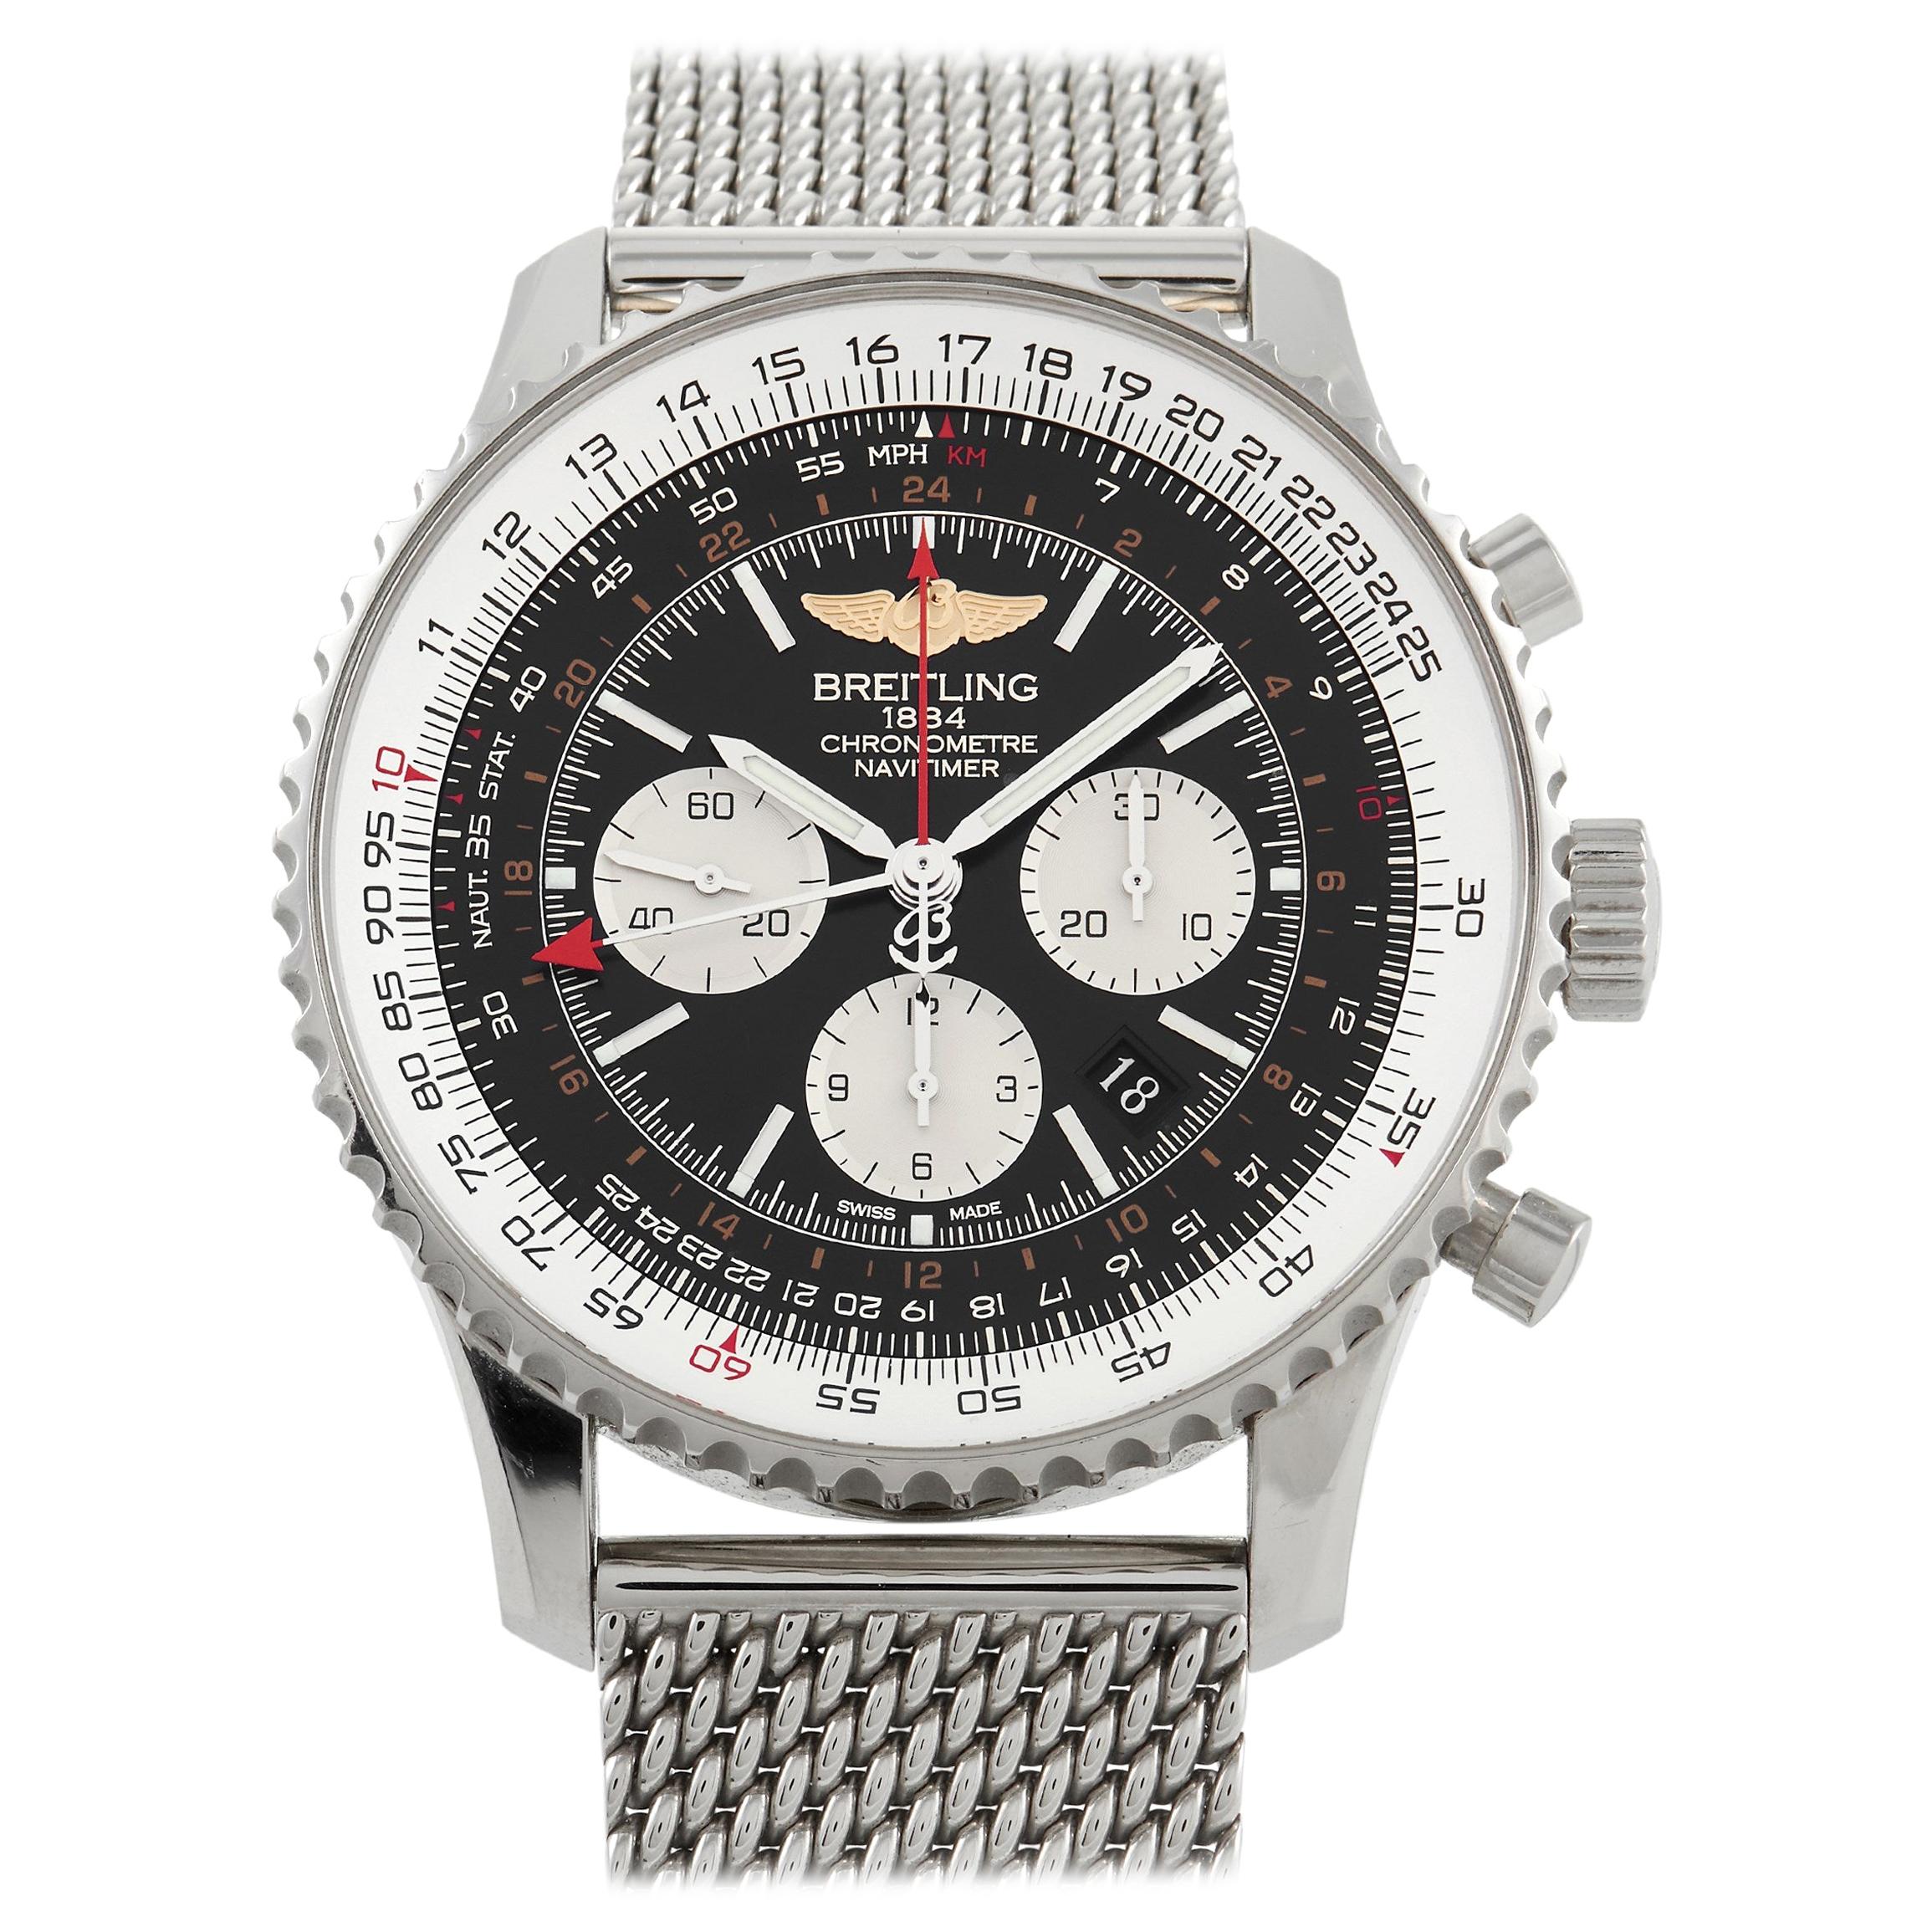 Breitling Navitimer Chronograph Automatic Watch AB0441